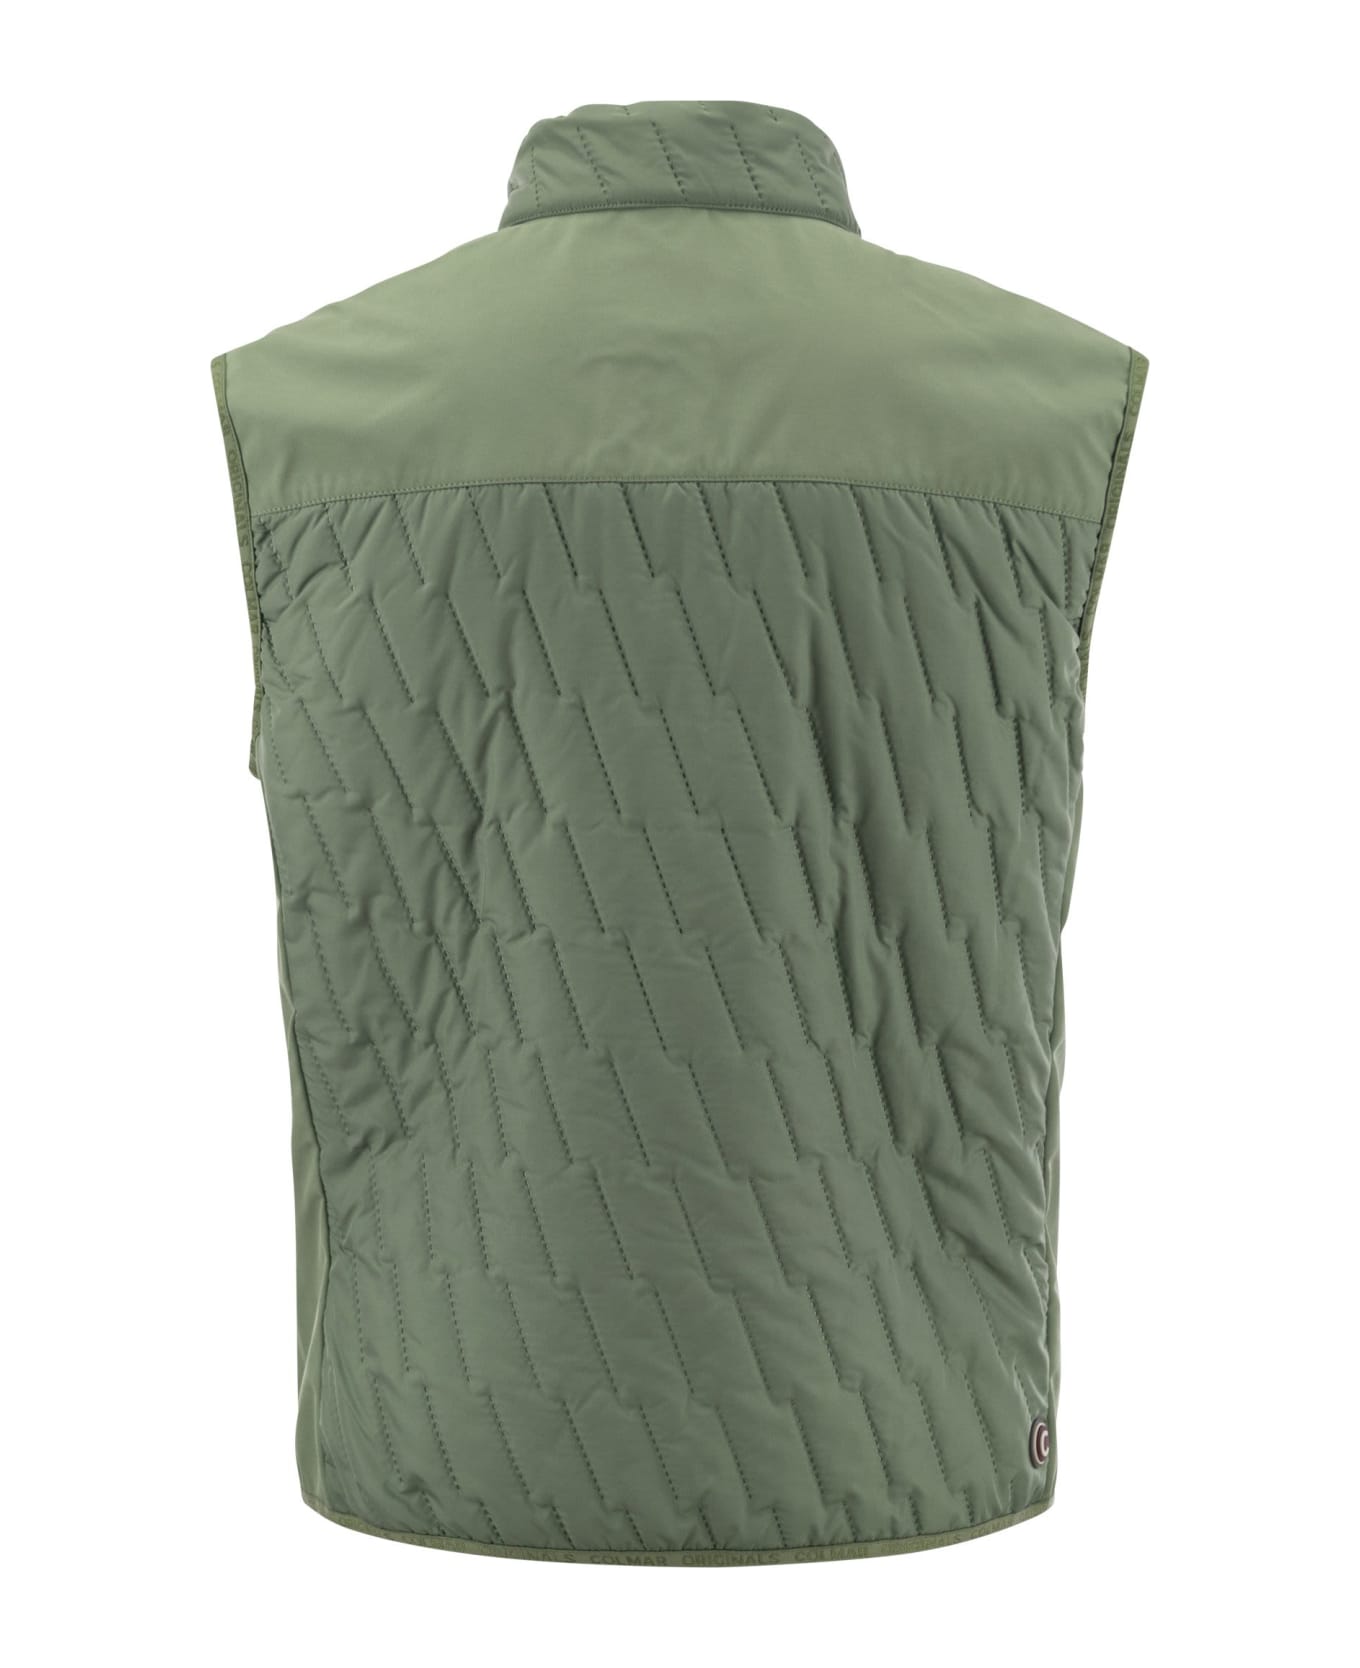 Colmar Quilted Waistcoat With Softshell Inserts - Green